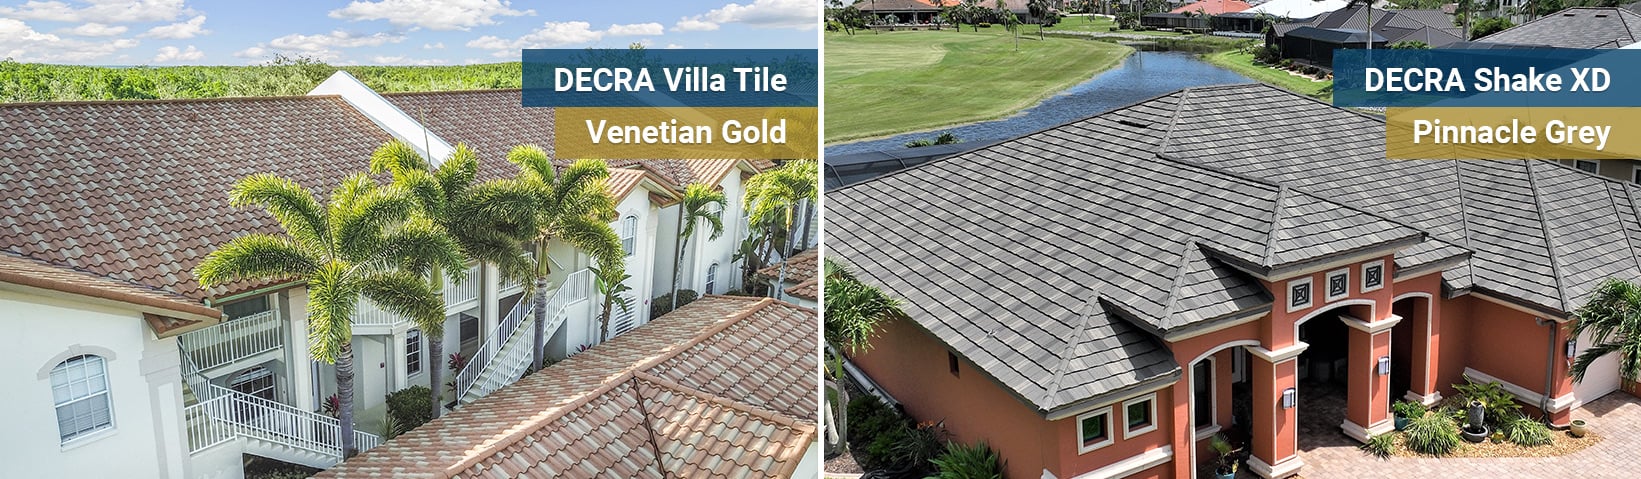 decra-metal-roofing-web-metal-roofing-products-side-by-side-villa-shake-xd-1